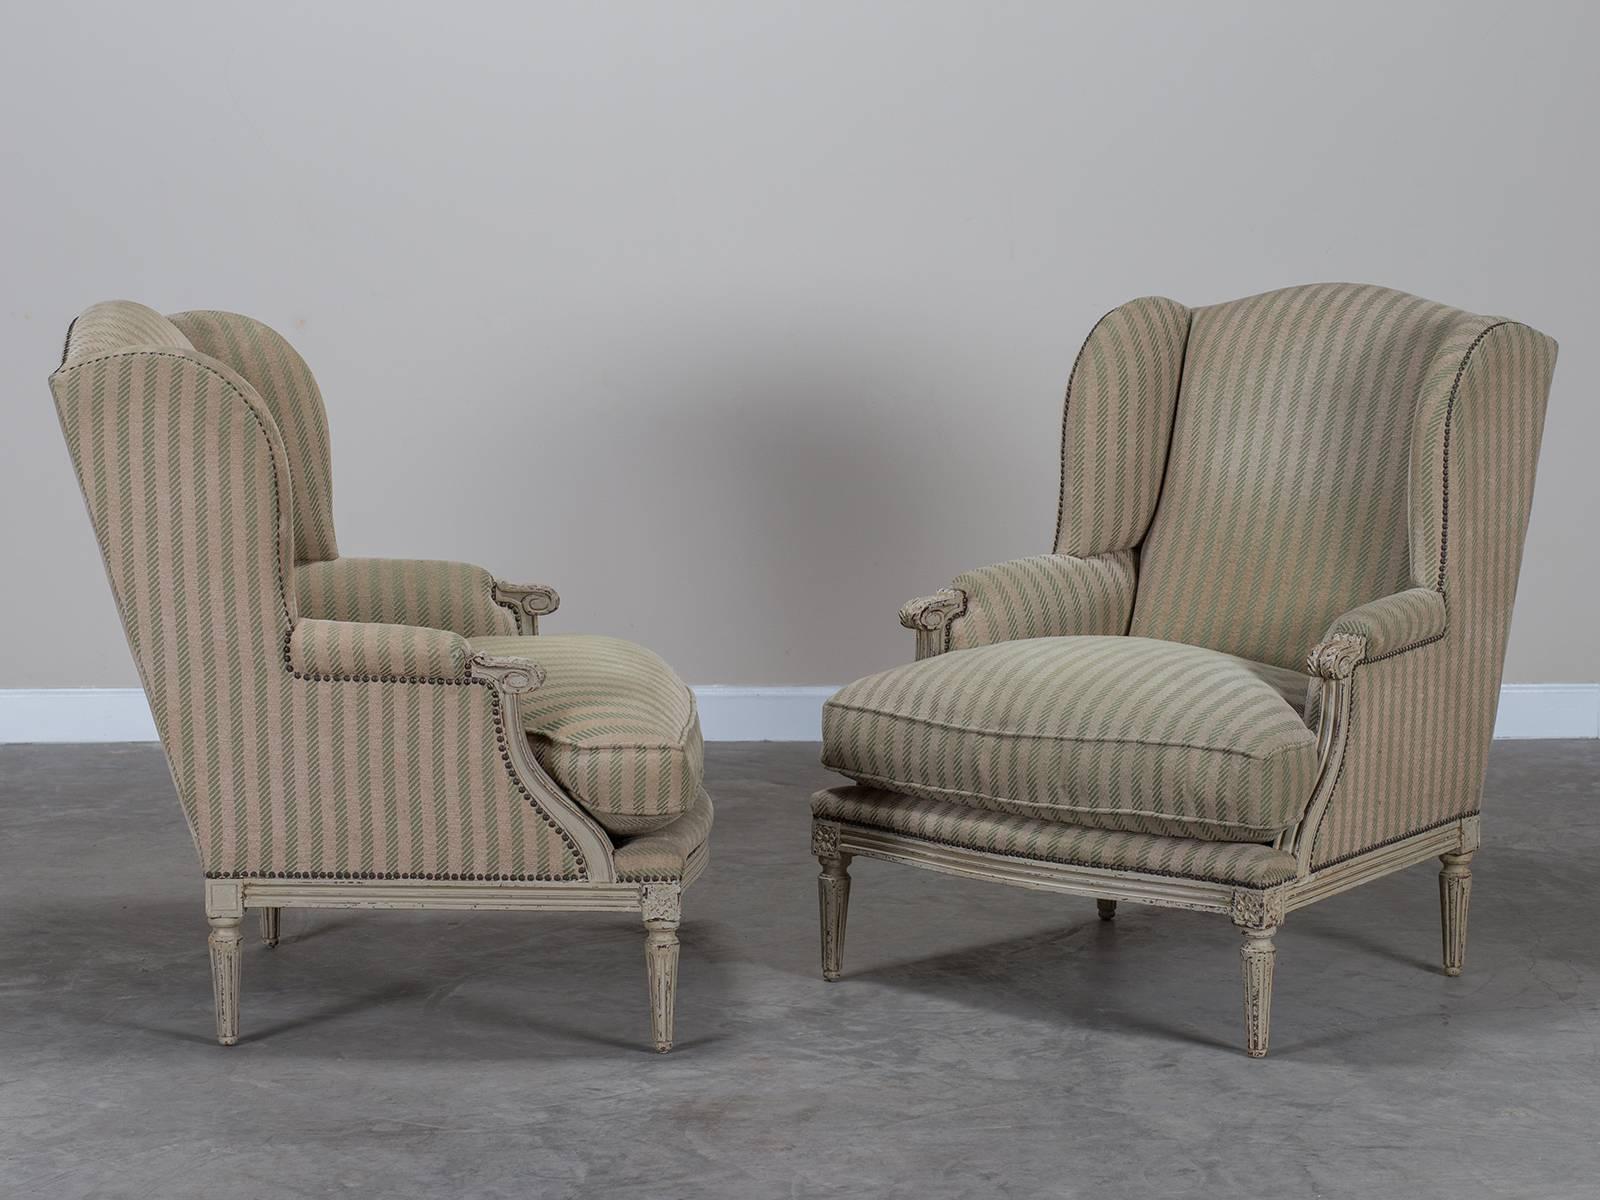 The grand scale of this pair of Louis XVI style French bergeres makes them supremely comfortable. The slant of the back and the depth and width of the seat are generous in proportion and well cushioned. Originally known as 